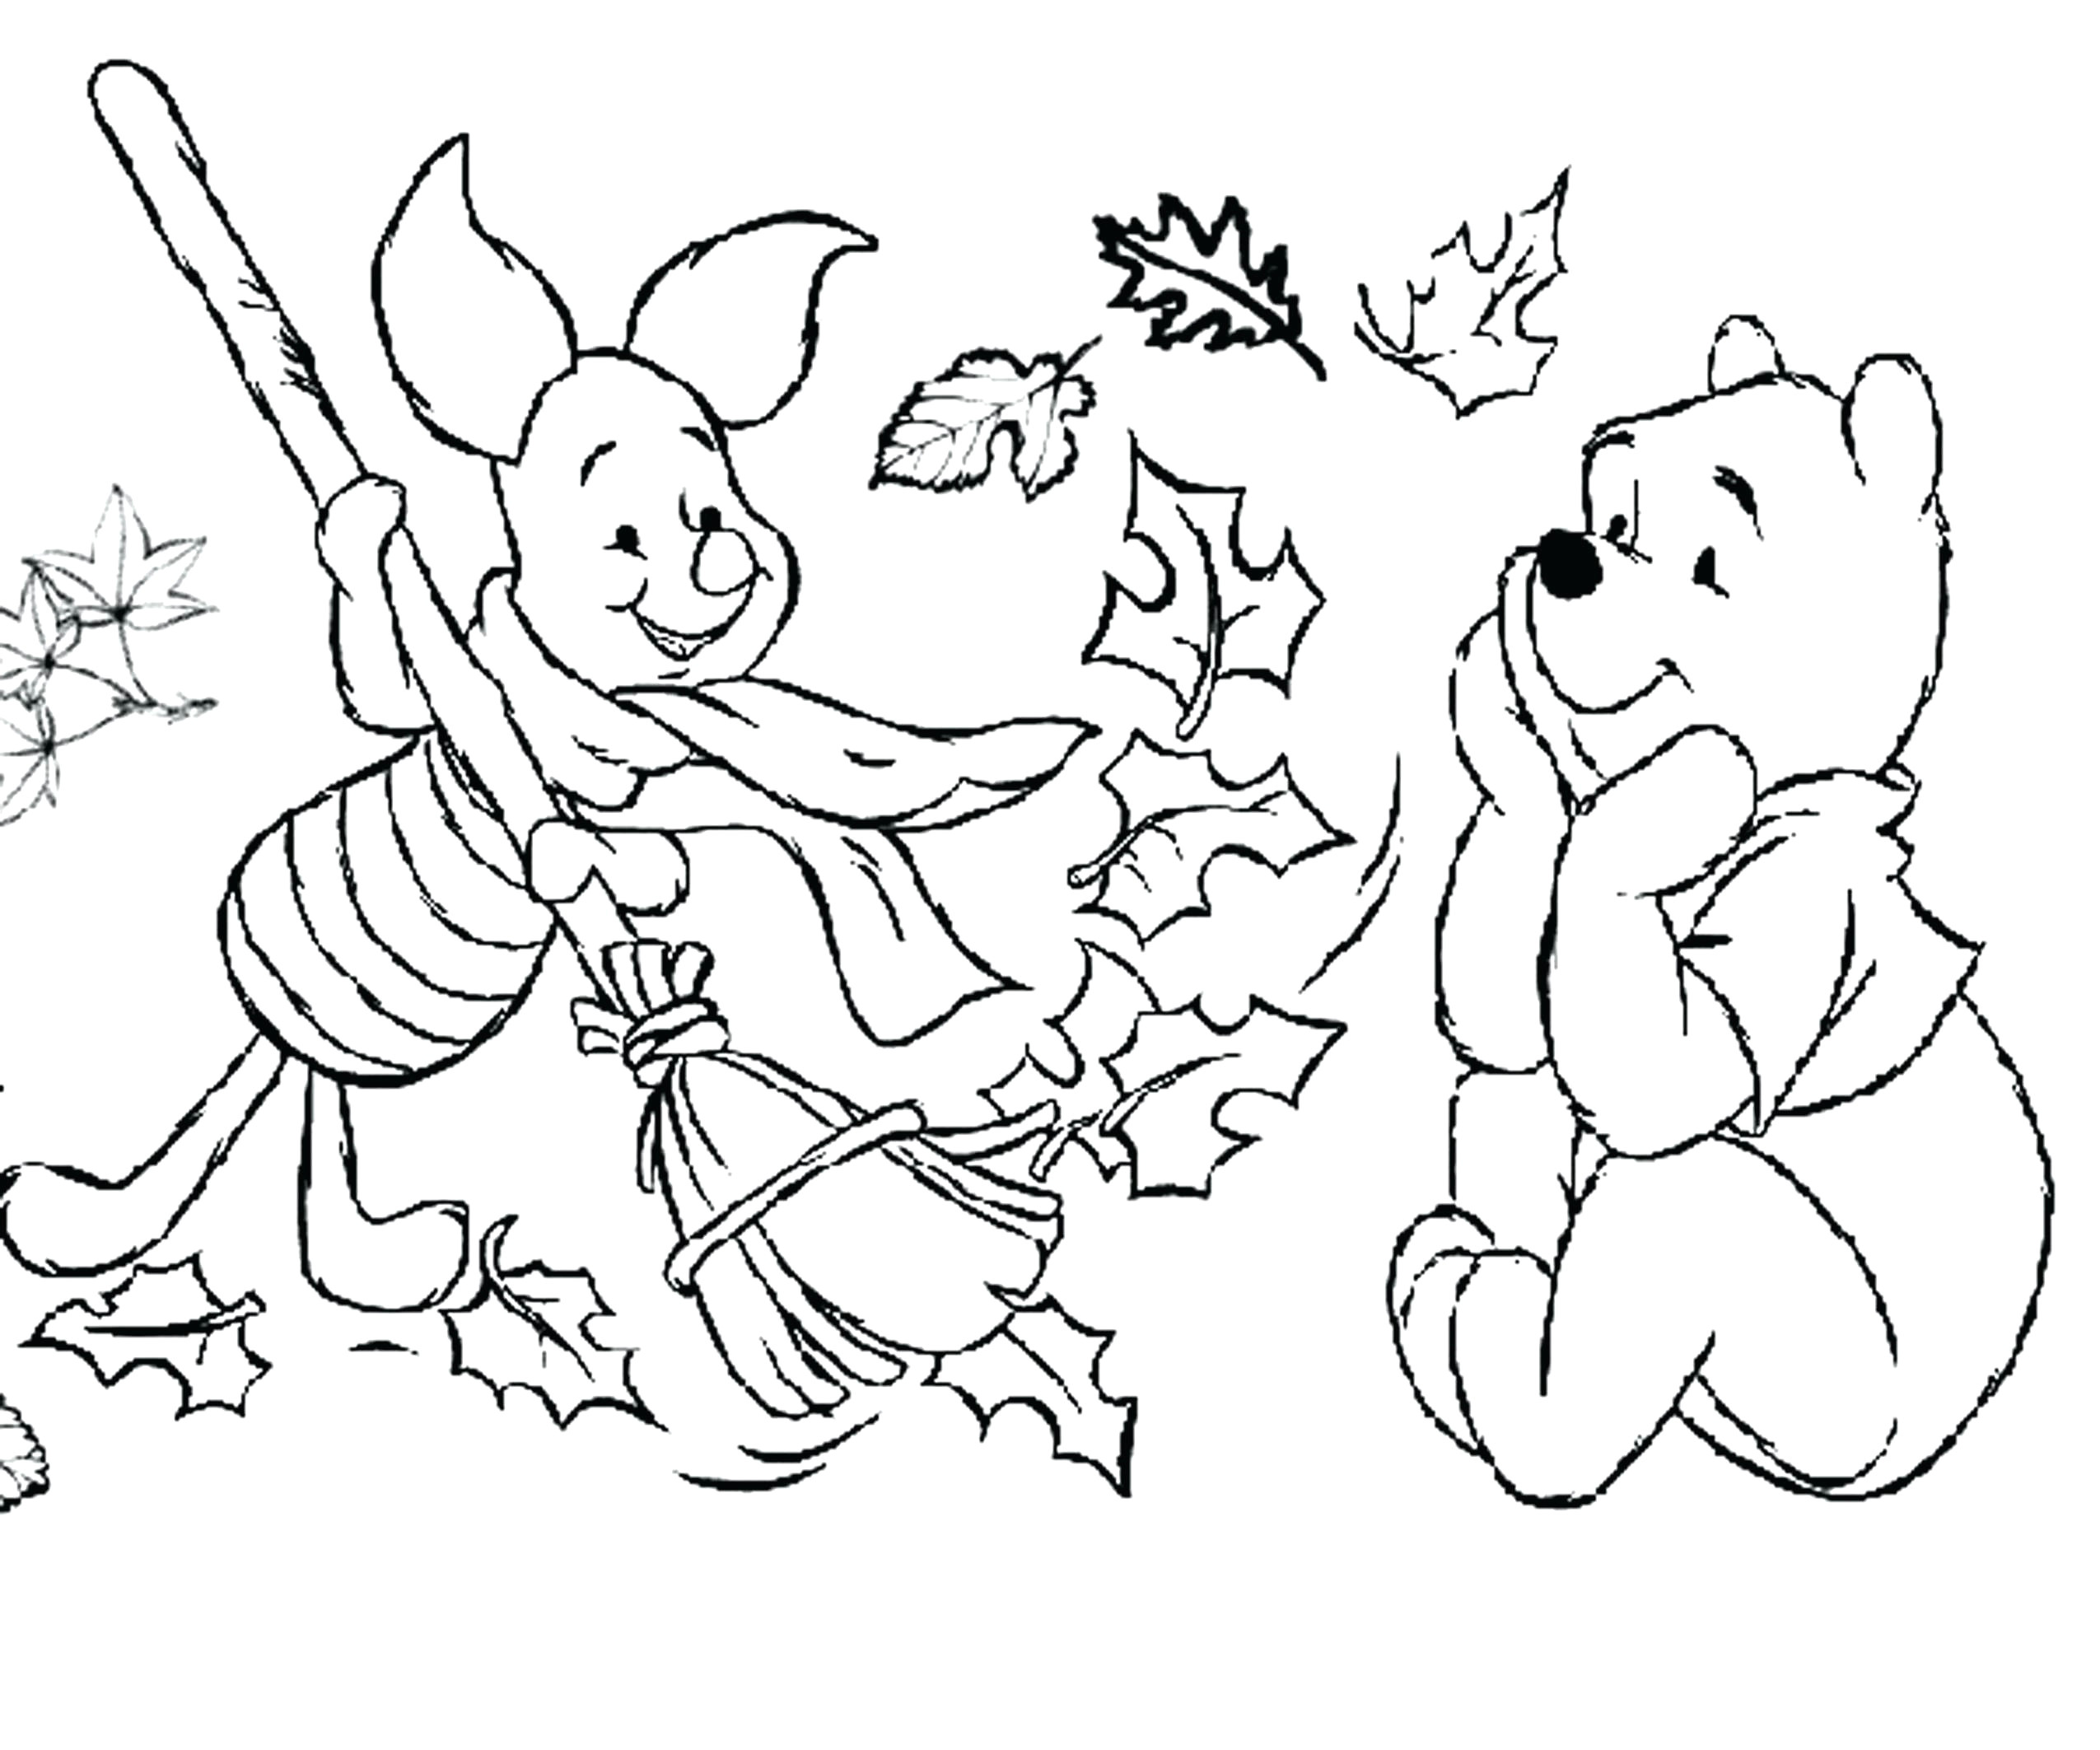 Q for Queen Drawing Unique Q Coloring Page Creditoparataxi Com